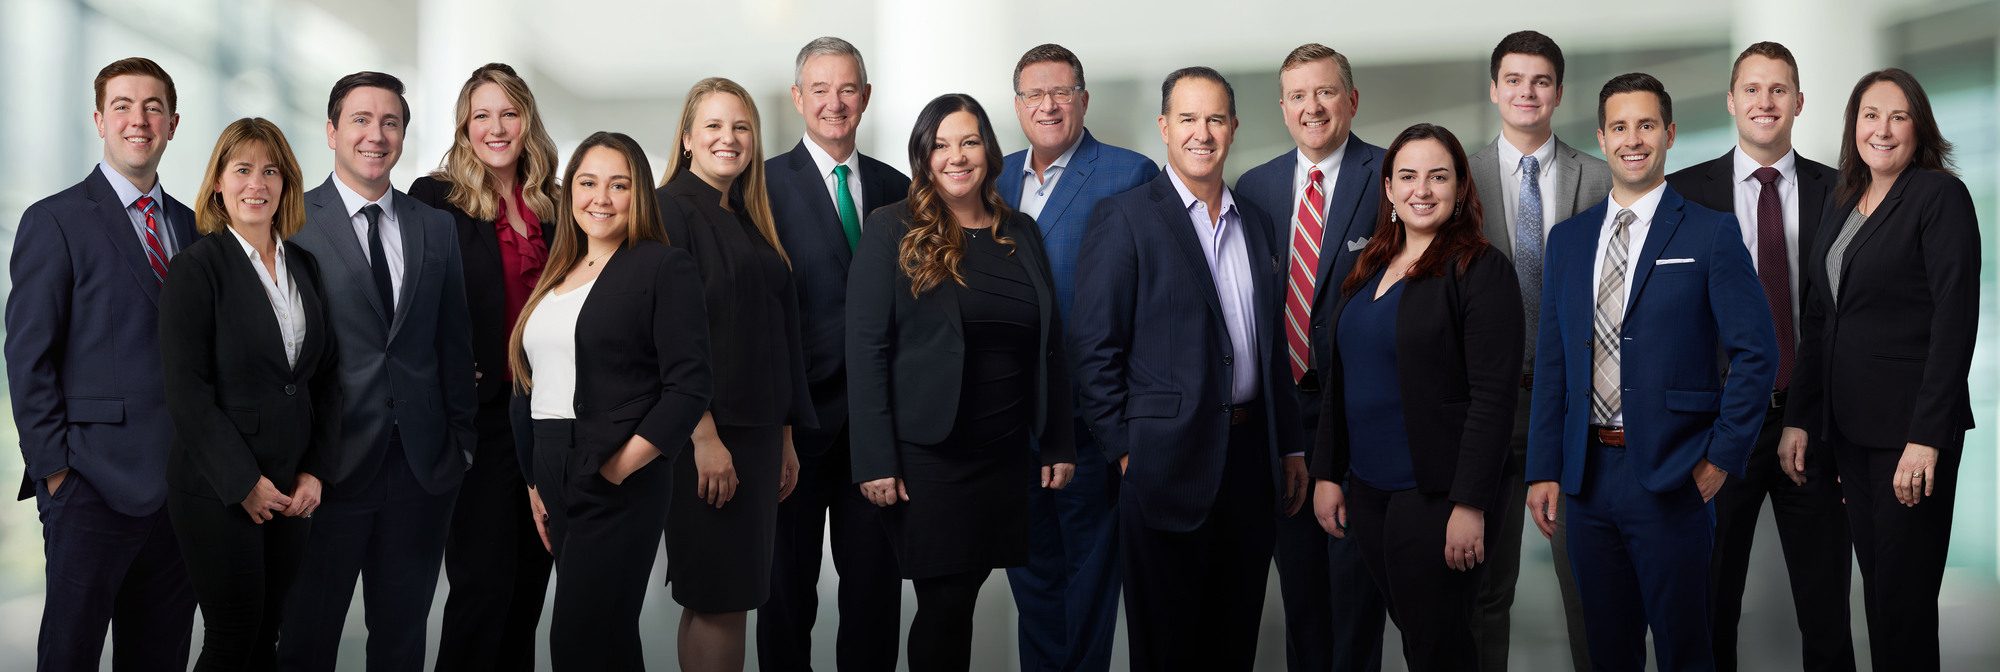 Pacific Wealth Group team photo